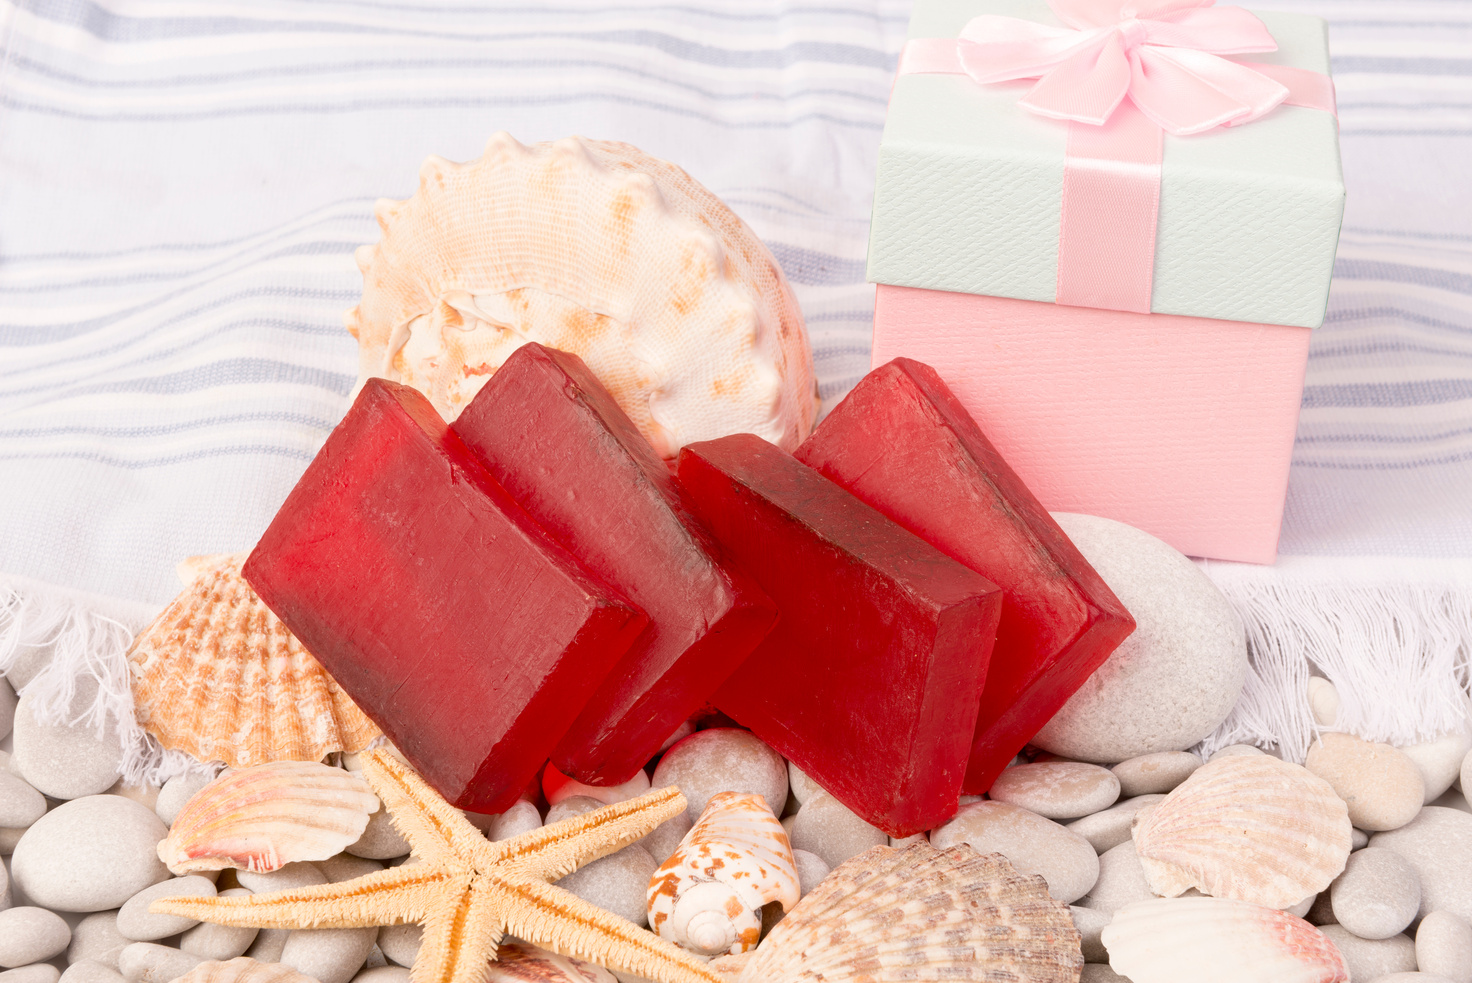 Red rose soap. Herbal soap. Hand made soap. Home made soap. Organic soap.